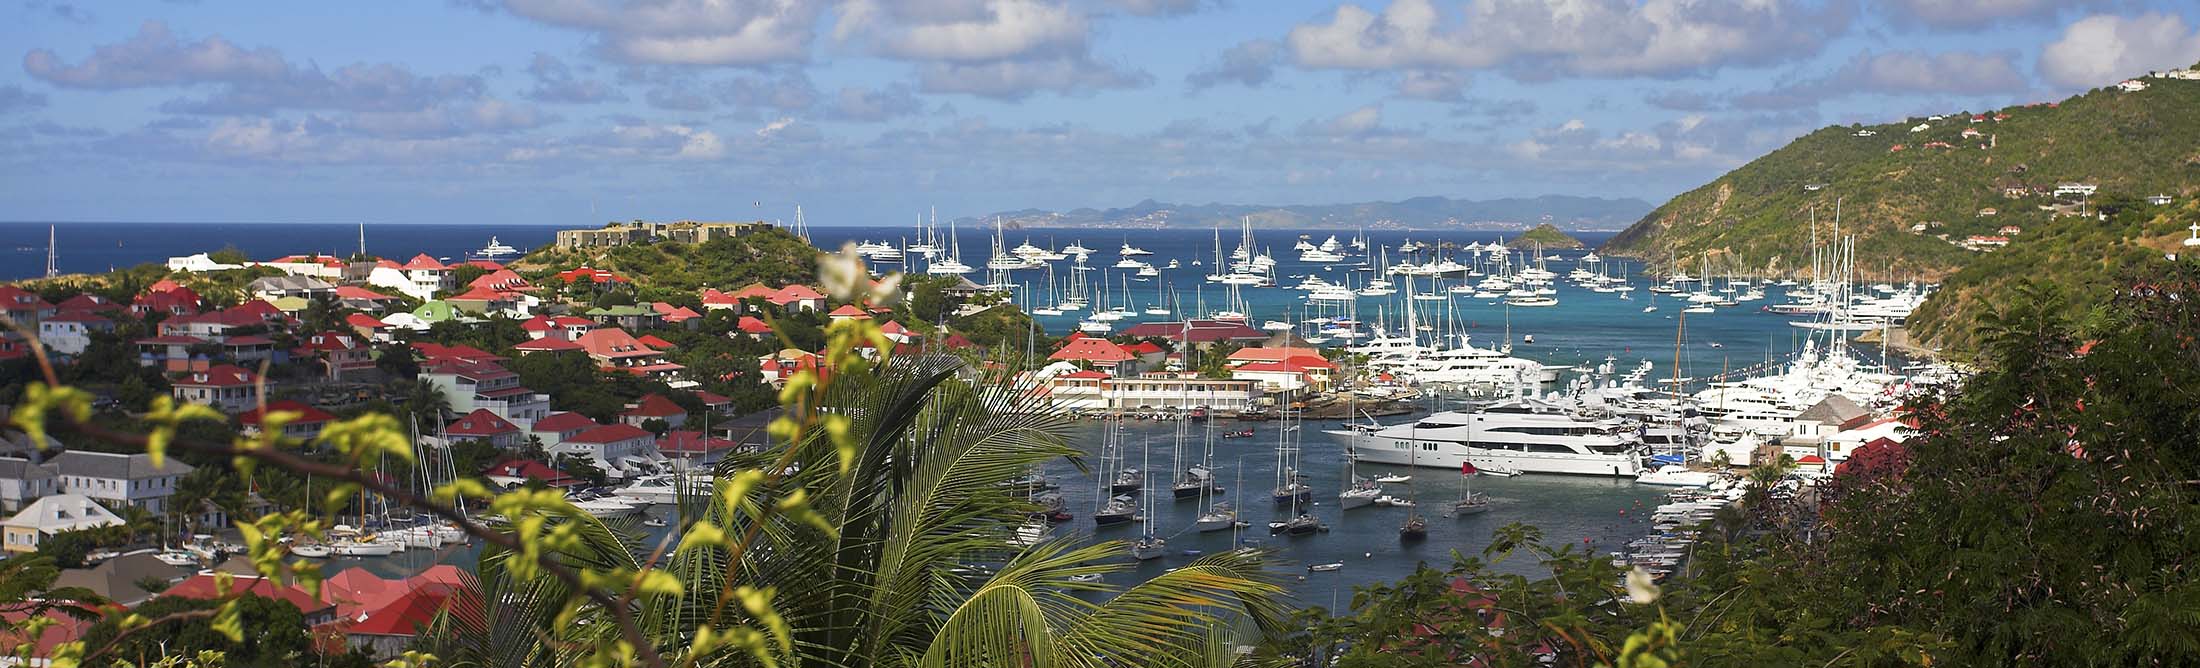 Travel Blog: Visiting St. Barts in 2022 – The Perfect Provenance